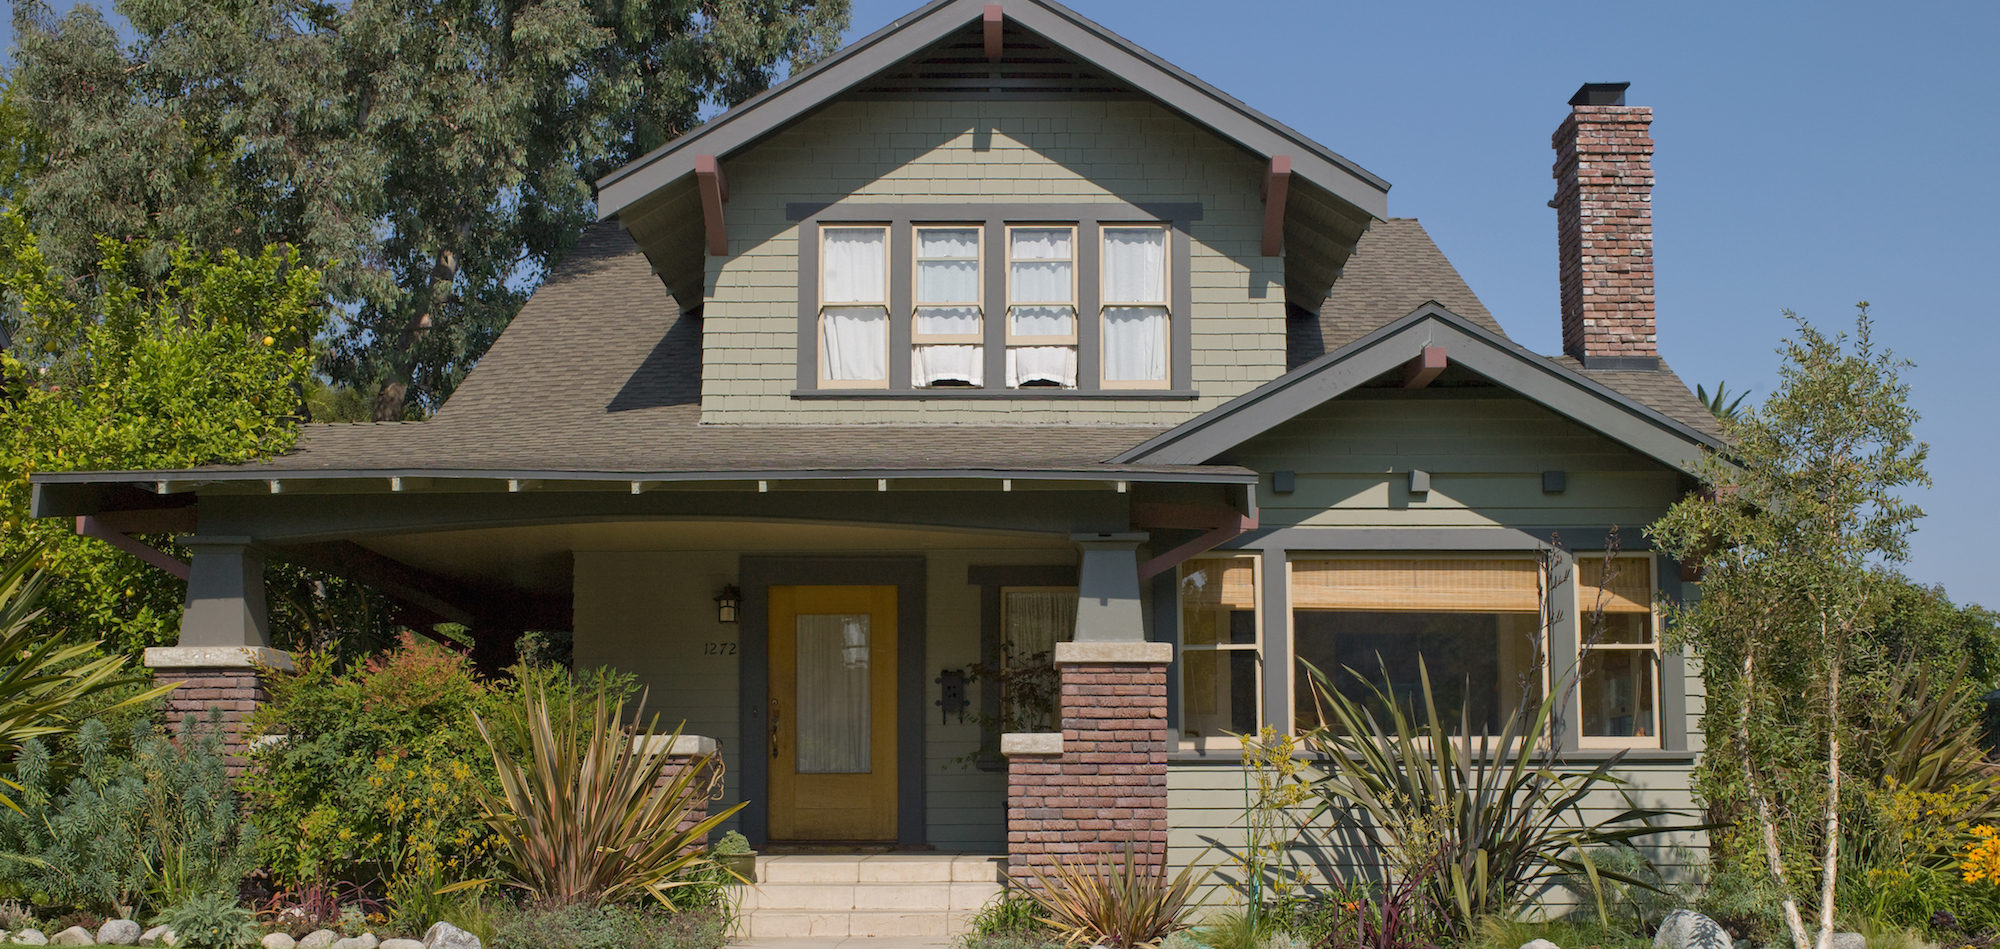 California First-Time Home Buyer Programs of 2021 - NerdWallet